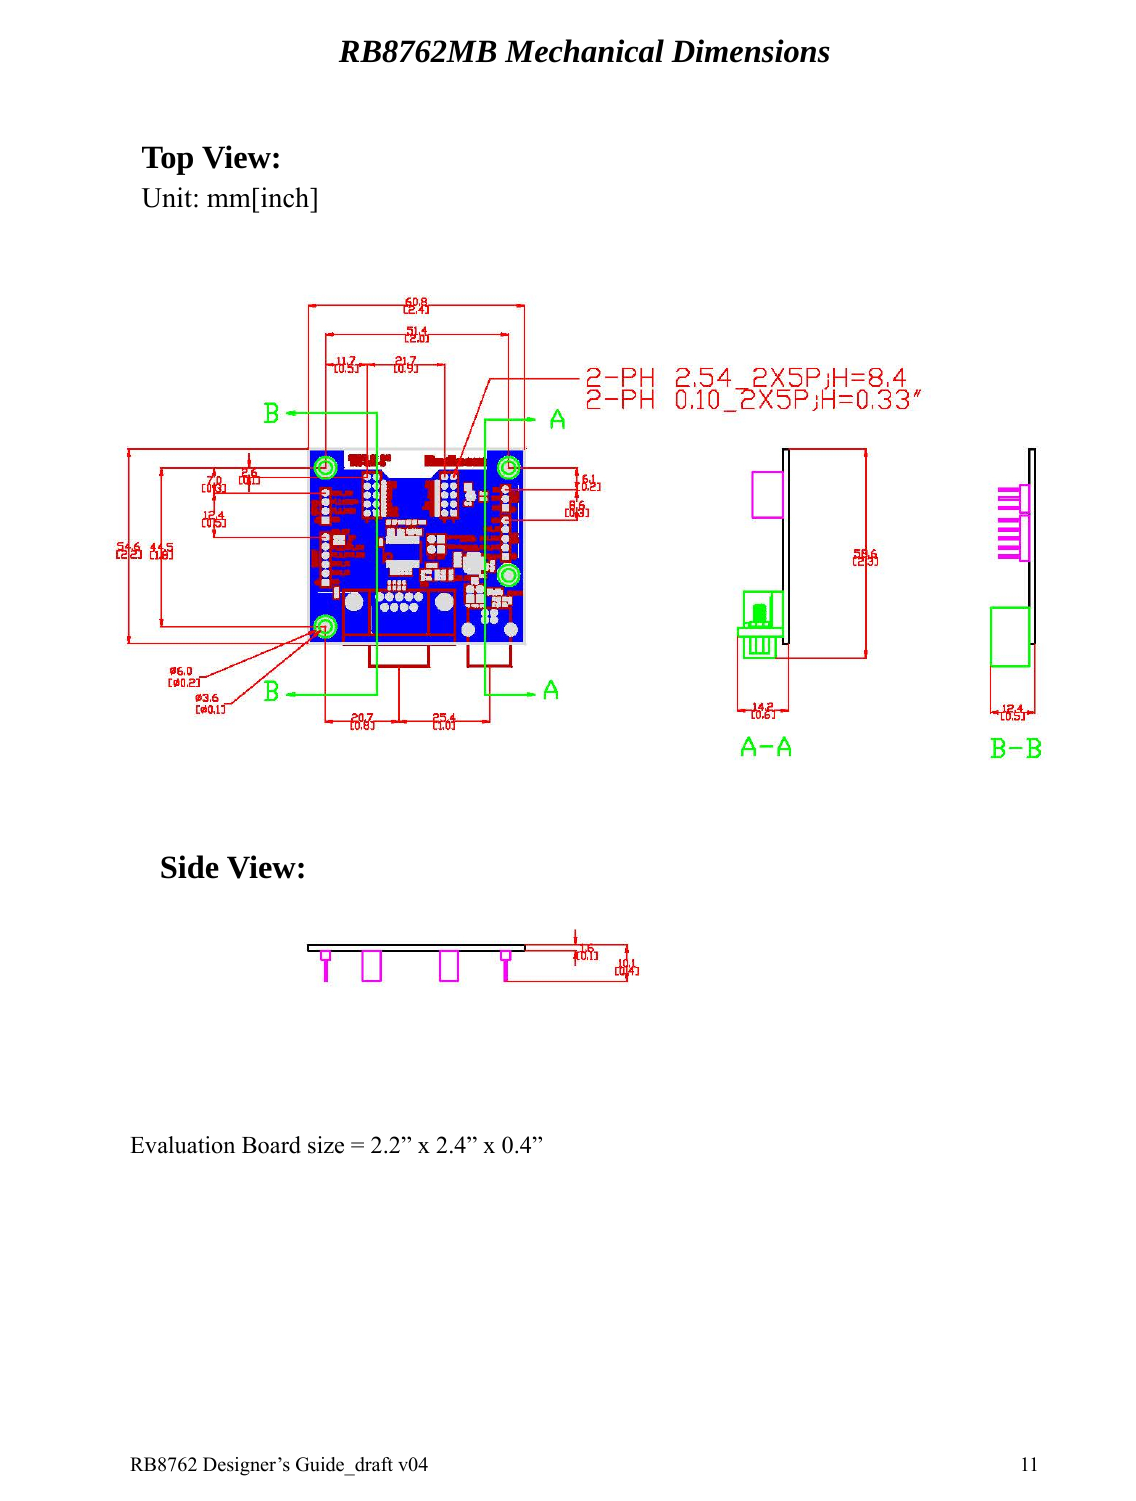 RB8762 Designer’s Guide_draft v04    11RB8762MB Mechanical Dimensions                Evaluation Board size = 2.2” x 2.4” x 0.4” Top View: Side View: Unit: mm[inch] 